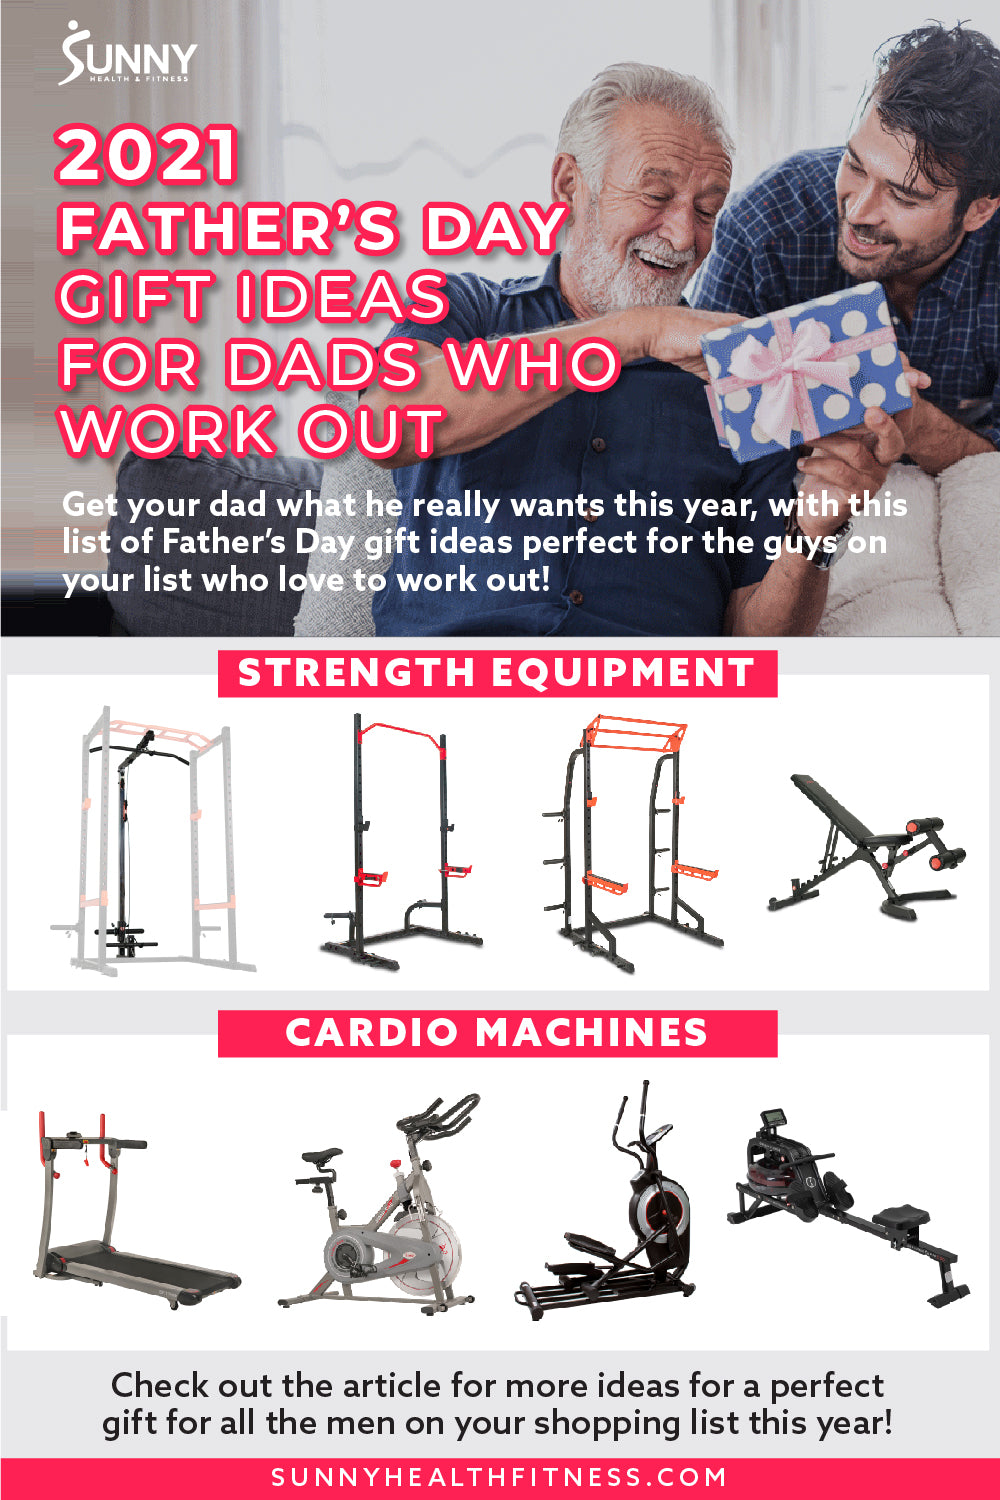 https://cdn.shopify.com/s/files/1/0052/7043/7978/t/90/assets/2021-Workout-Dads-Father-Day-Gift-Guide-1.jpg